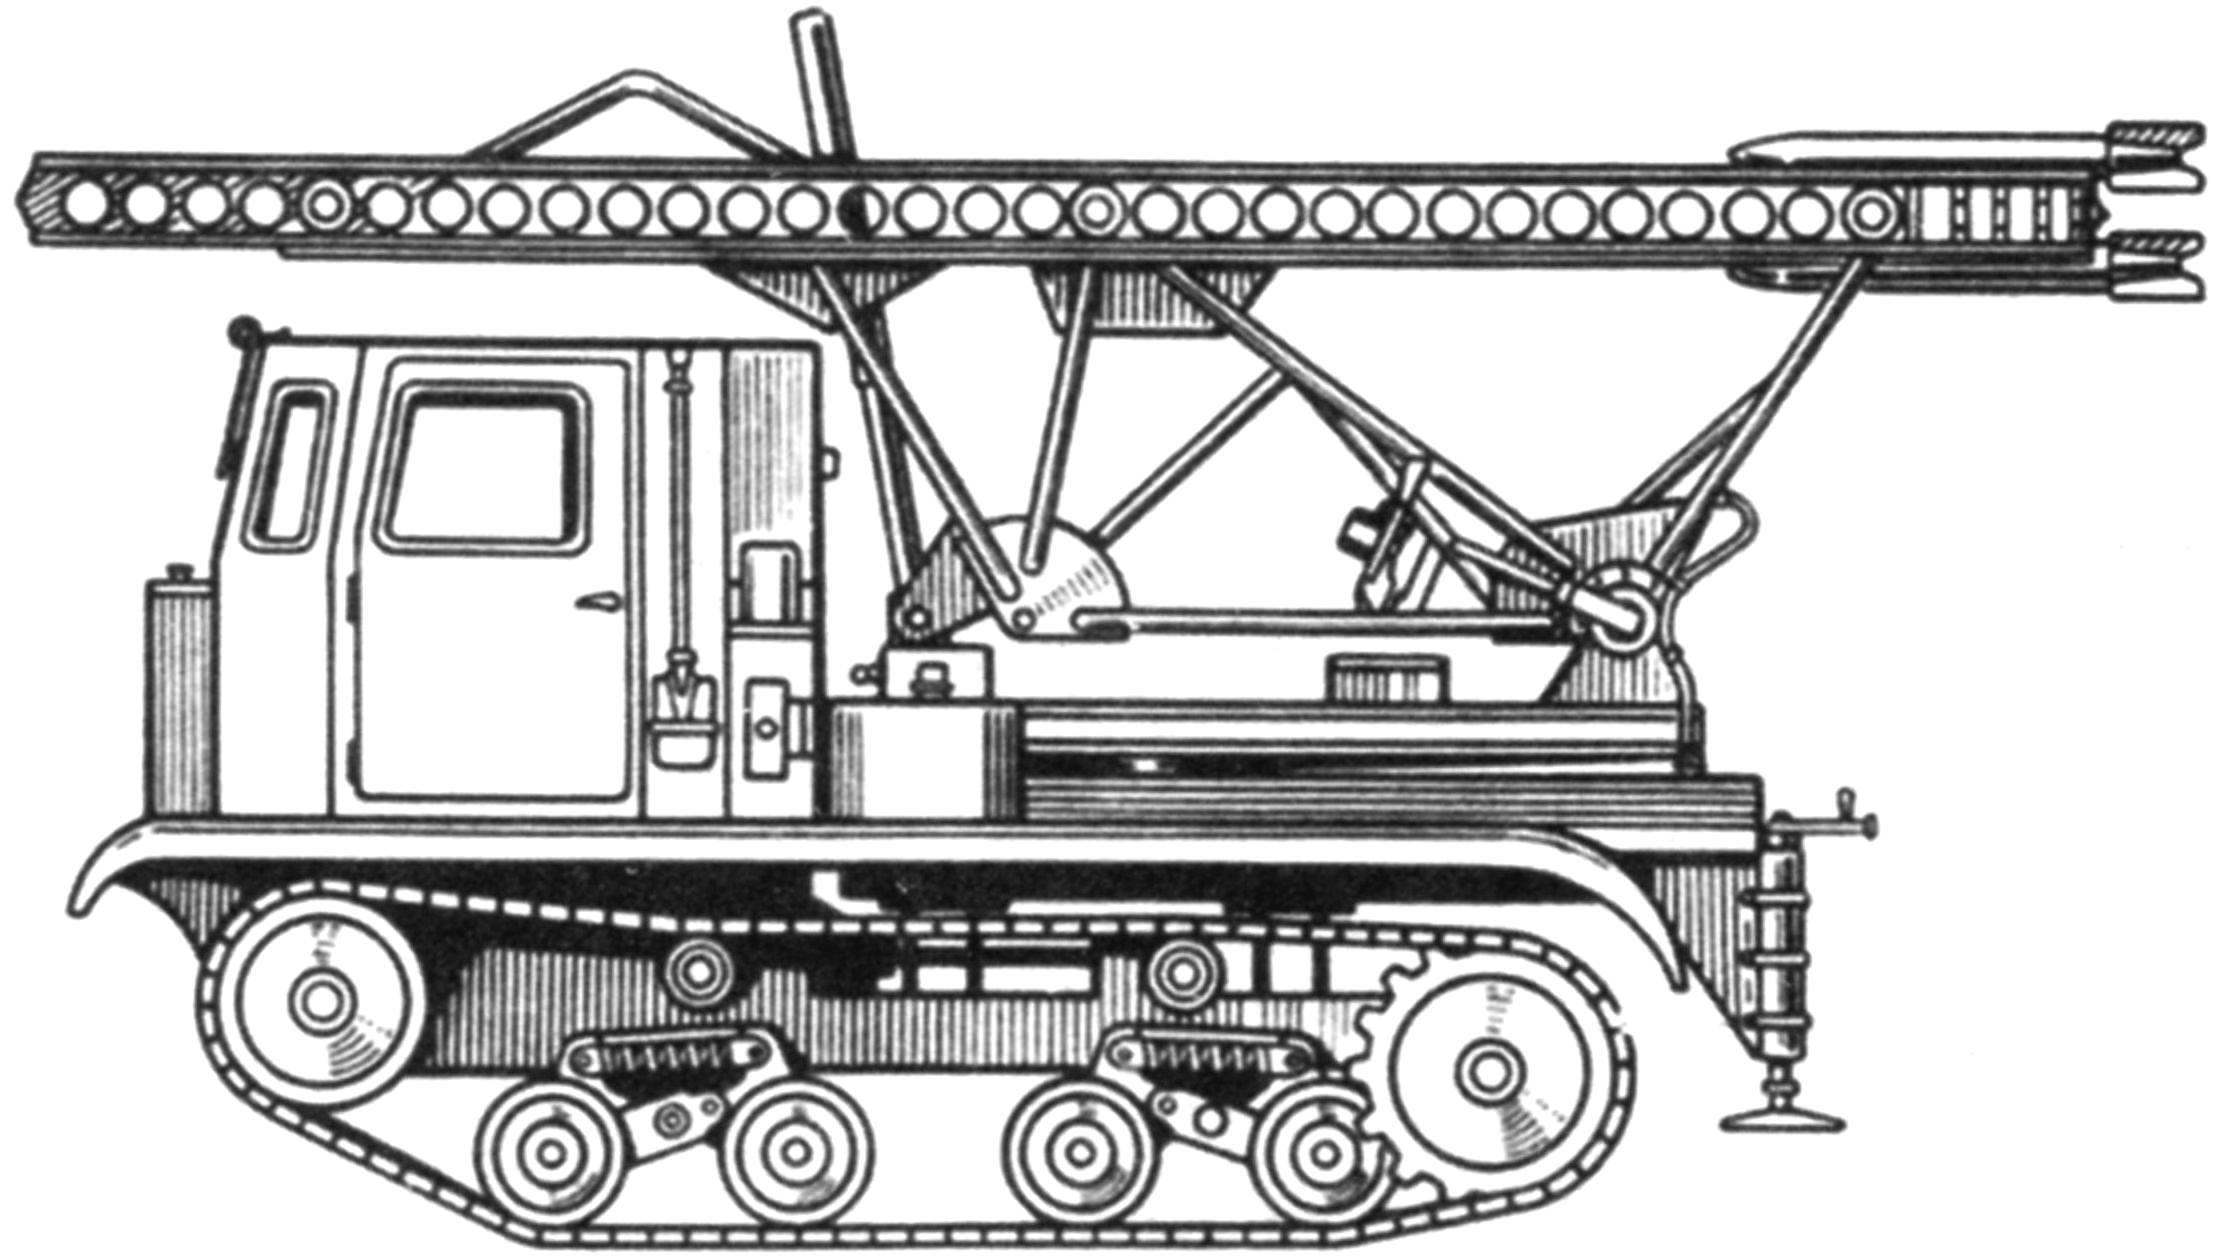 MLRS M-13 on the chassis of the STZ-5